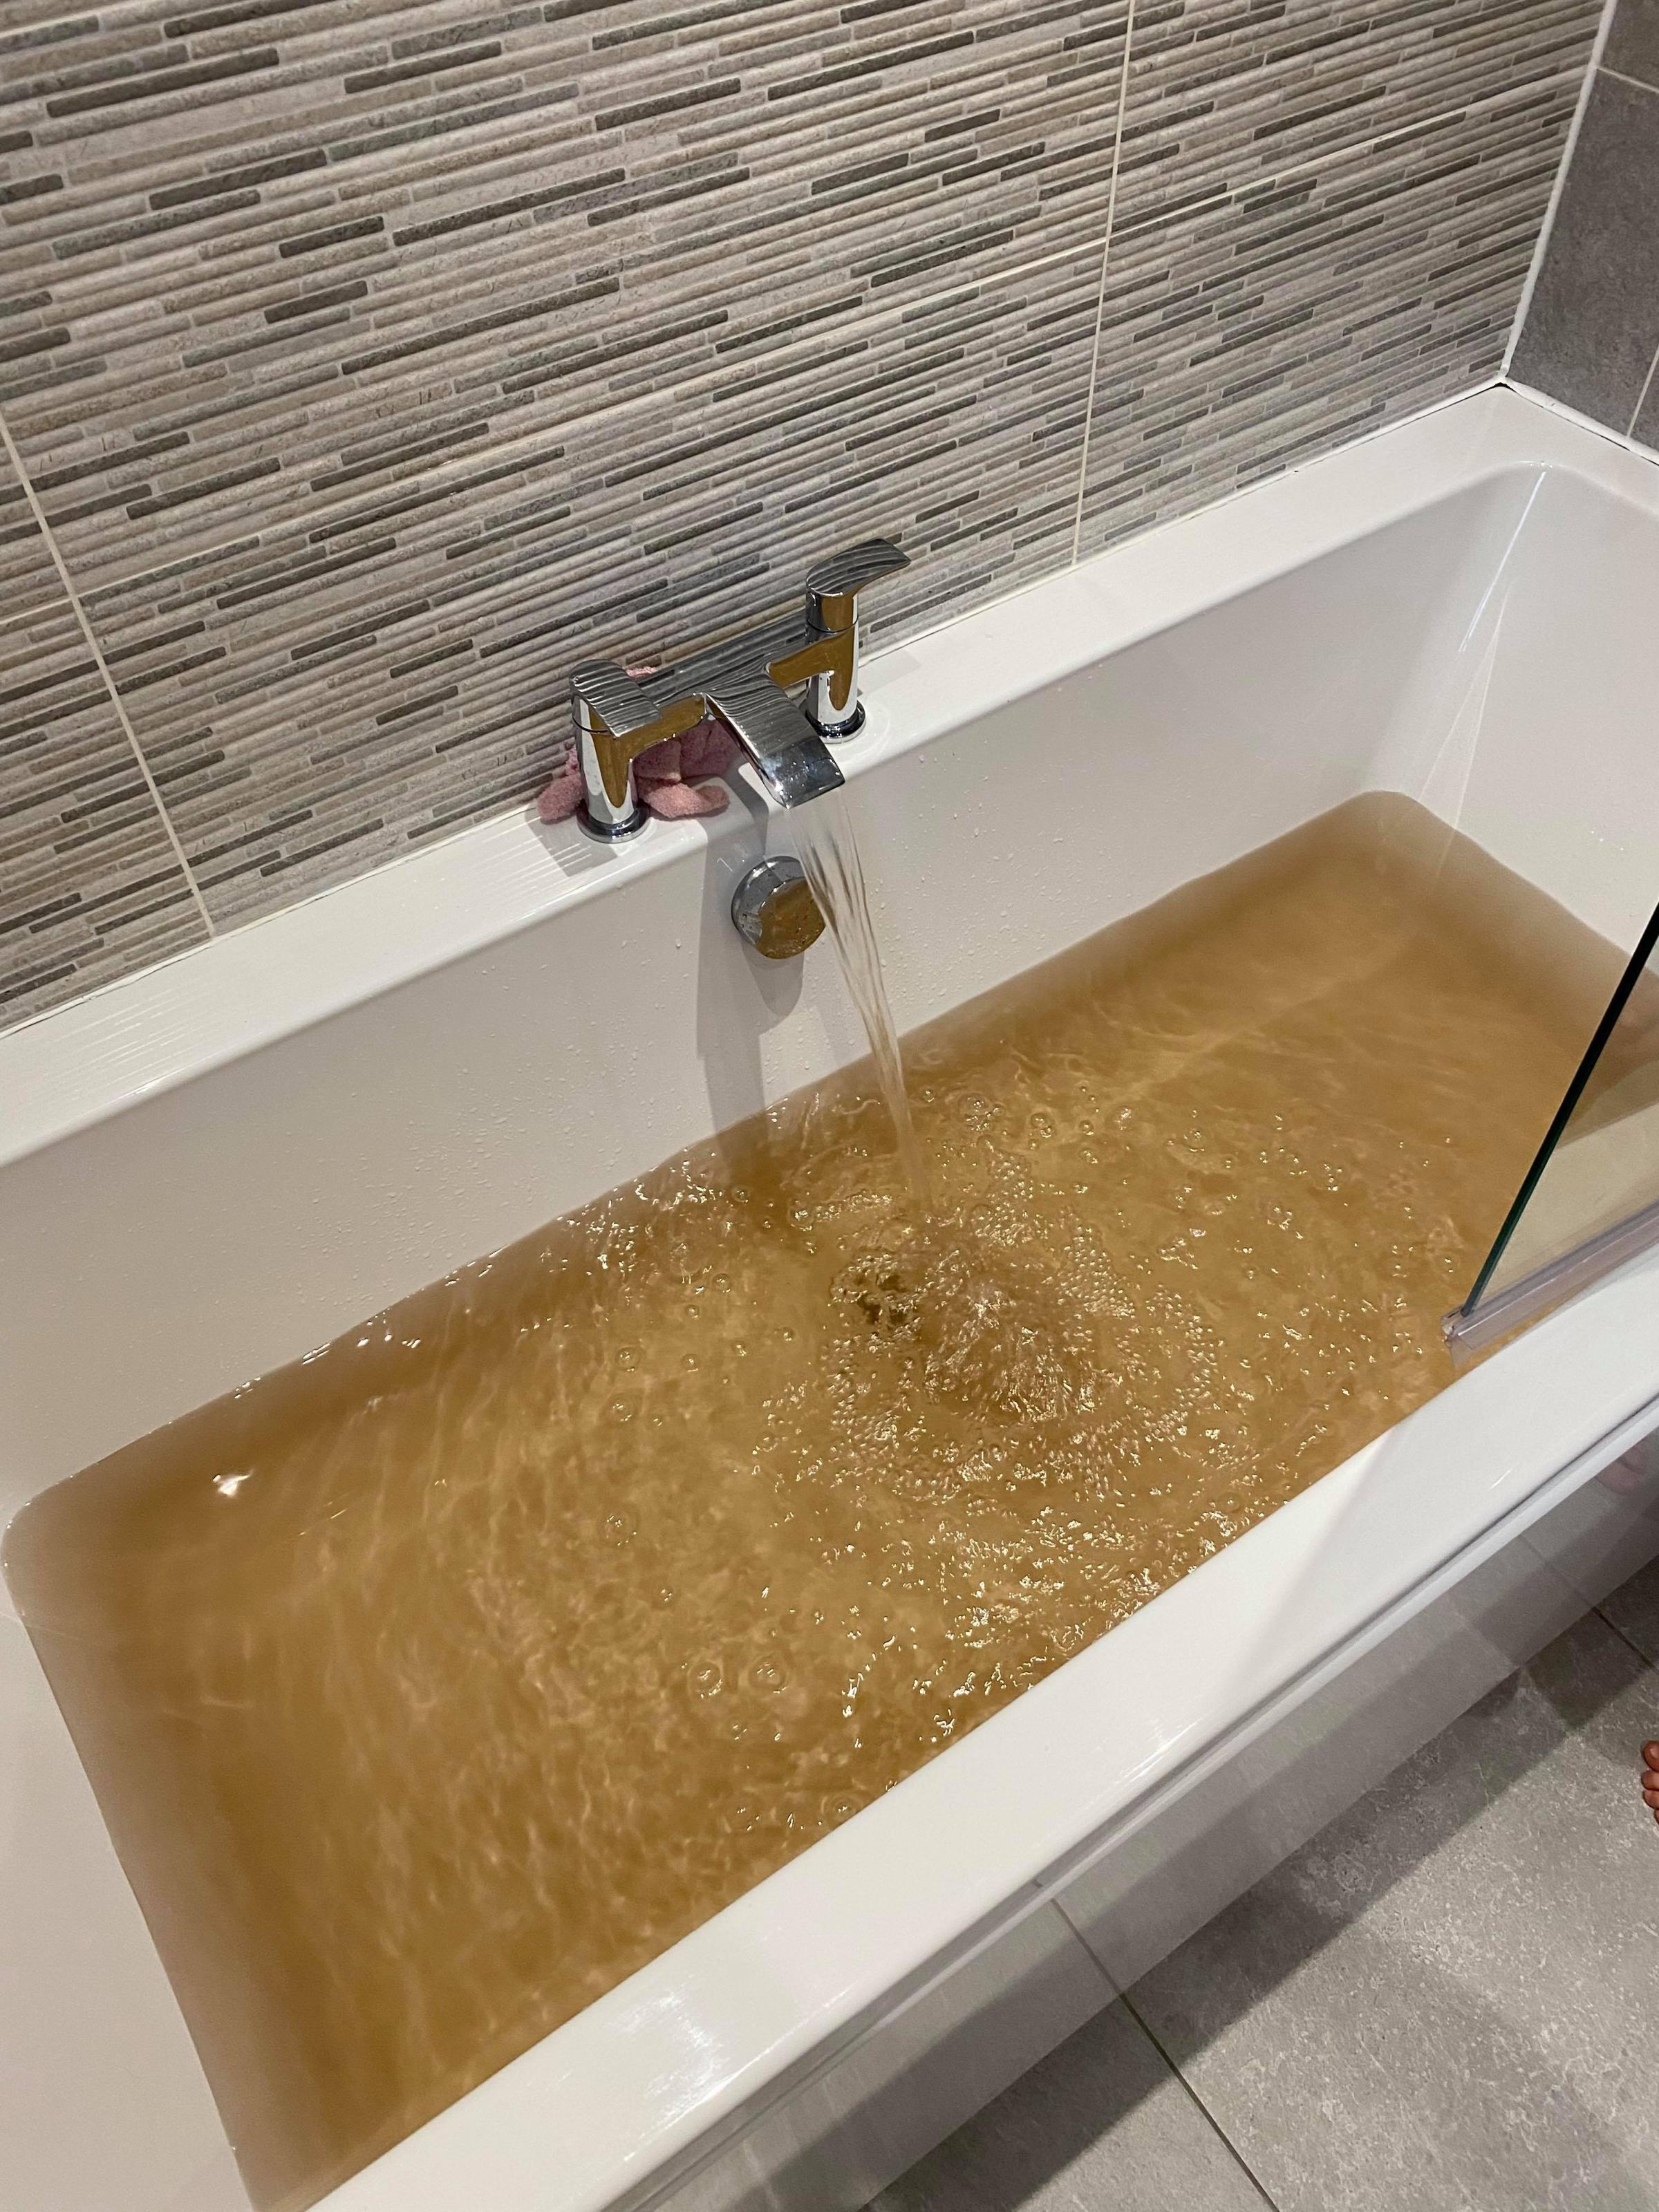 Linnvale dad blasts Scottish Water for ‘dirty water’ at family home